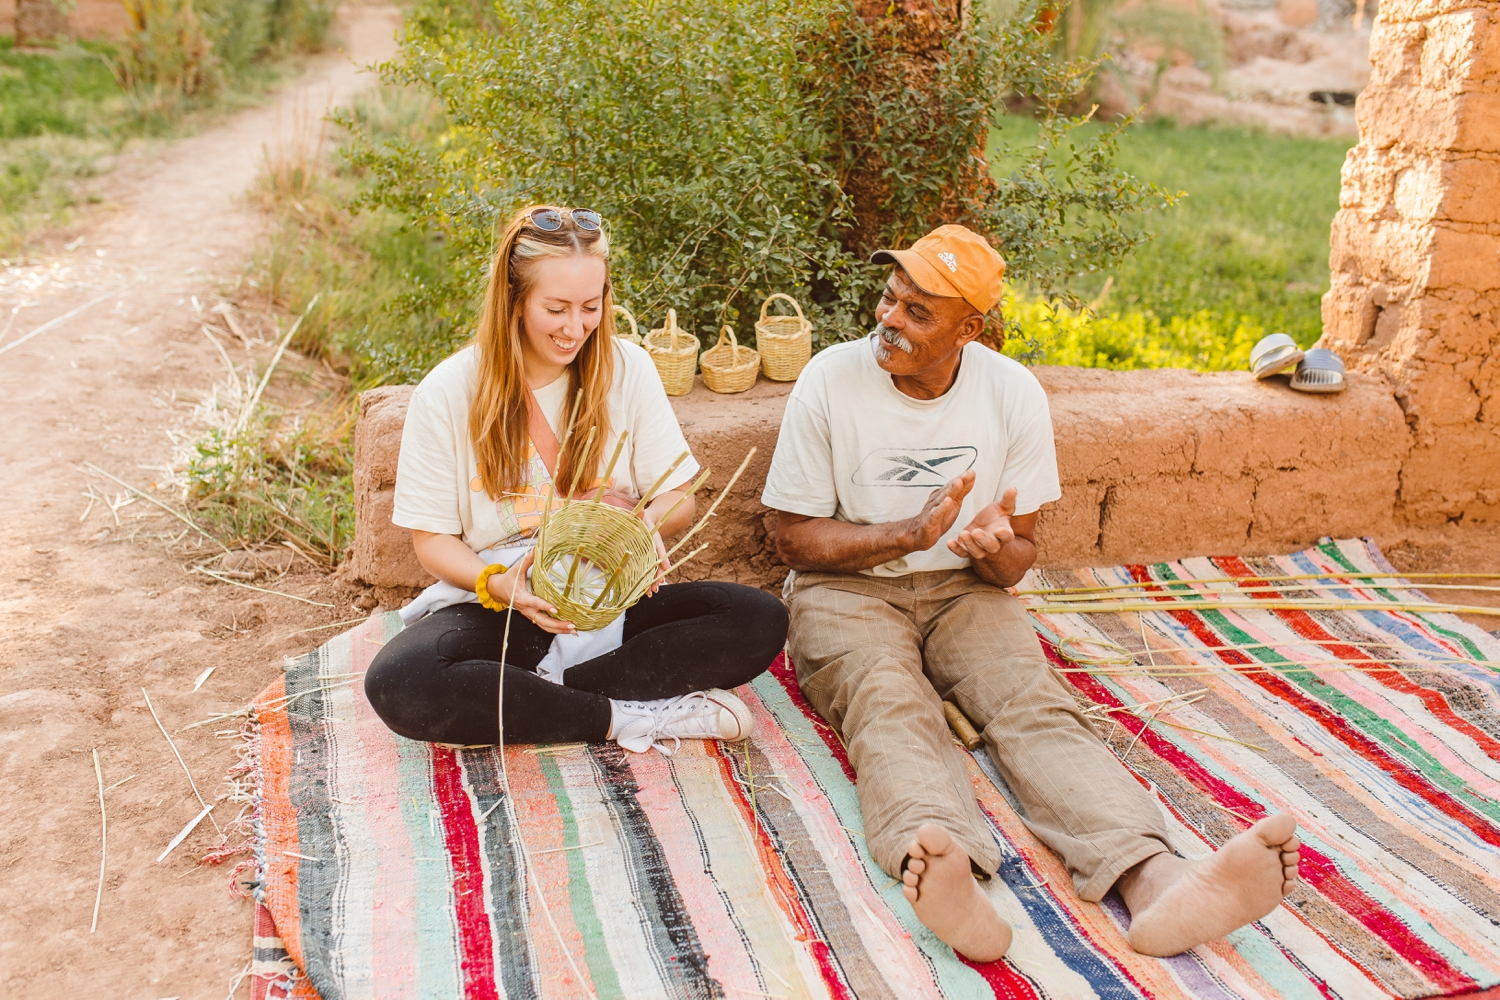 Travel photographer Brooke Michelle sitting with local merchant and learning how to weave a basket in Marrakesh, Morocco | Brooke Michelle Photography